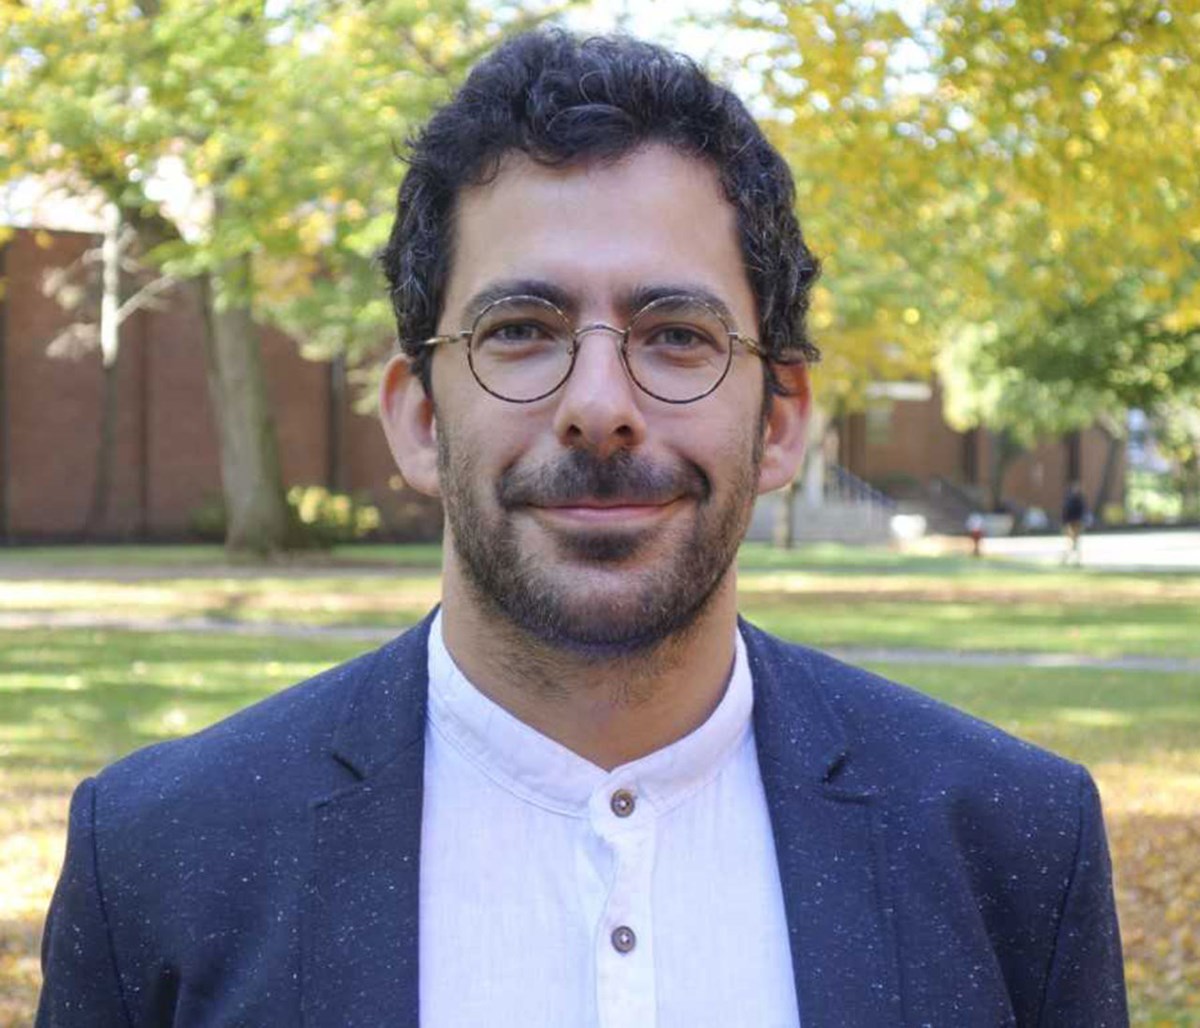 Rui Gomes Coelho is a Postdoctoral Research Associate in Archaeology and the Ancient World at the Joukowsky Institute for Archaeology and the Ancient World at Brown University. He is also Researcher at UNIARQ—Center for Archaeology—at the University of Lisbon.